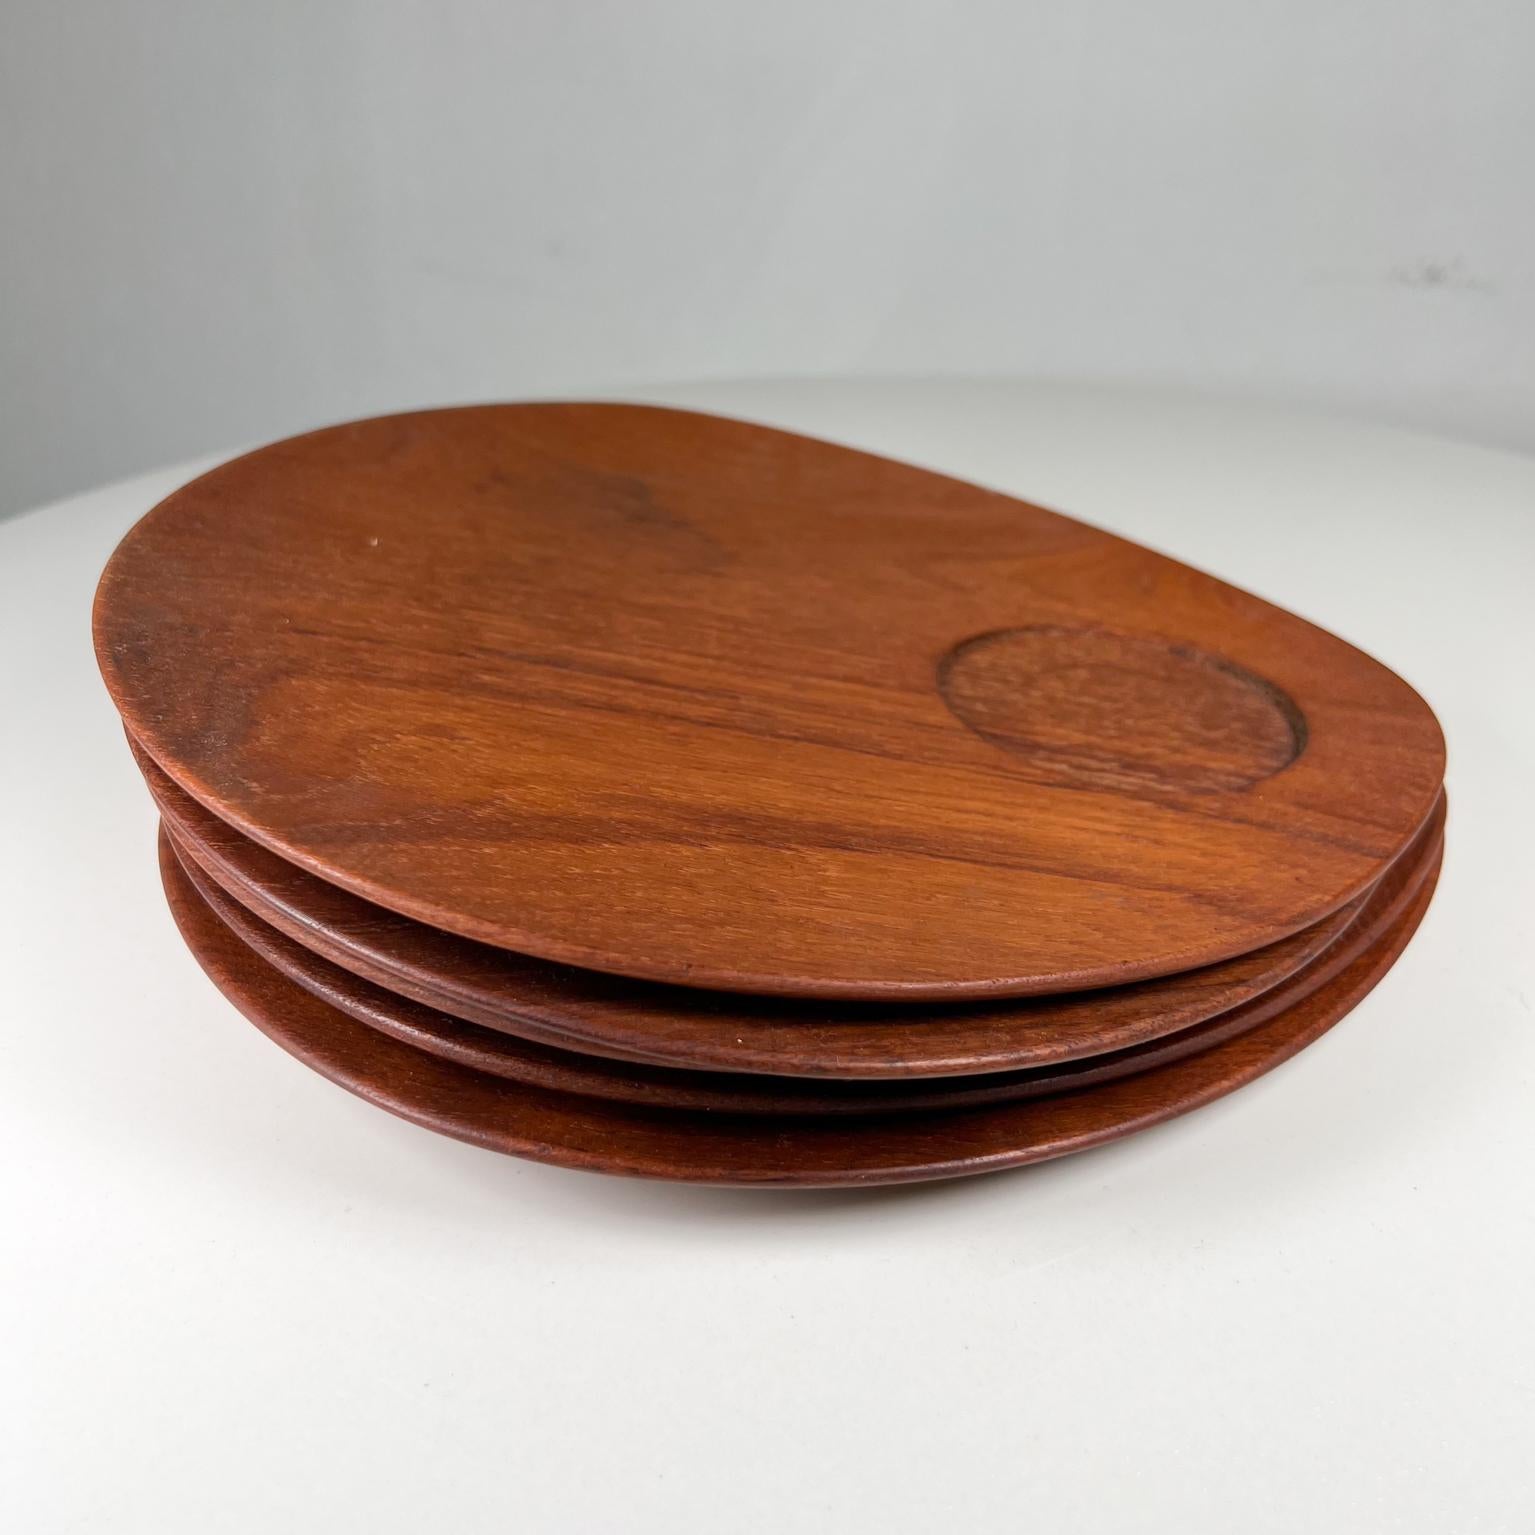 1960s Mid-Century Modern five Teakwood breakfast snack plates by Lunning INC Denmark
Stamped by maker.
This set of 5 egg or teardrop shaped breakfast plates in teak features a practical circular drill-out space ideal for cup.
9.5 w x 9.75 d x